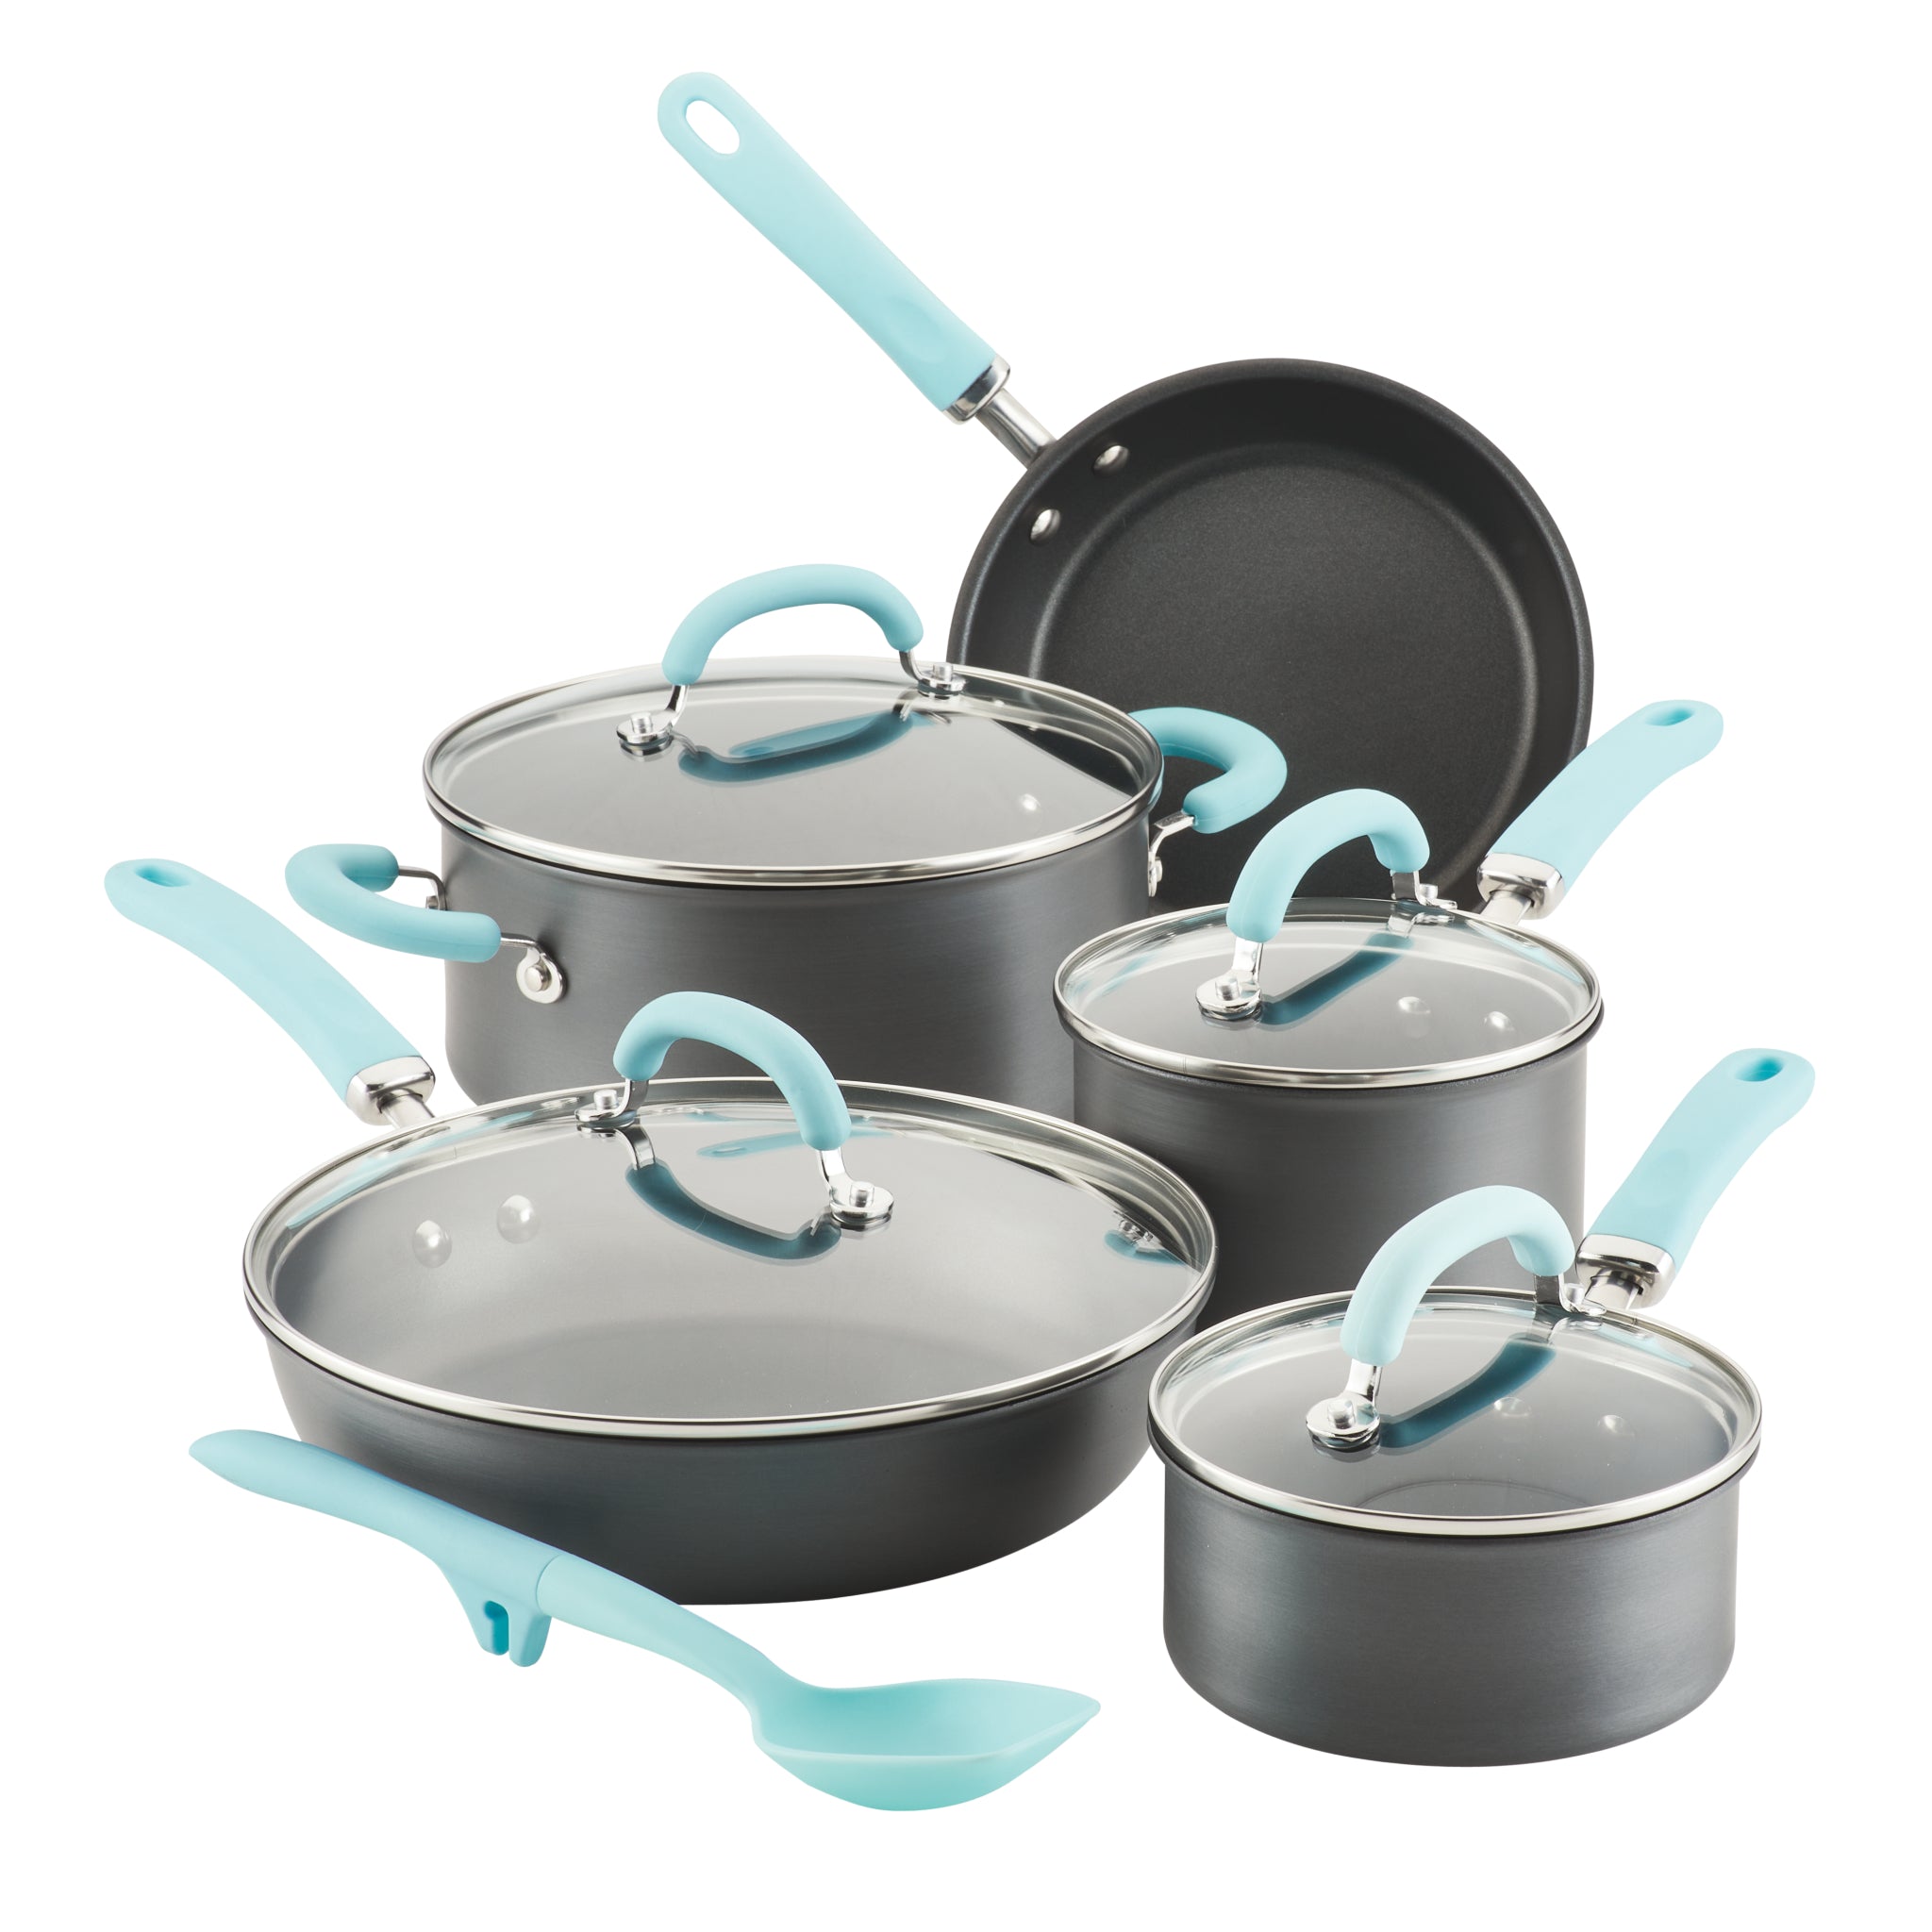  Rachael Ray Twin Pack Hard Anodized Aluminum Skillet